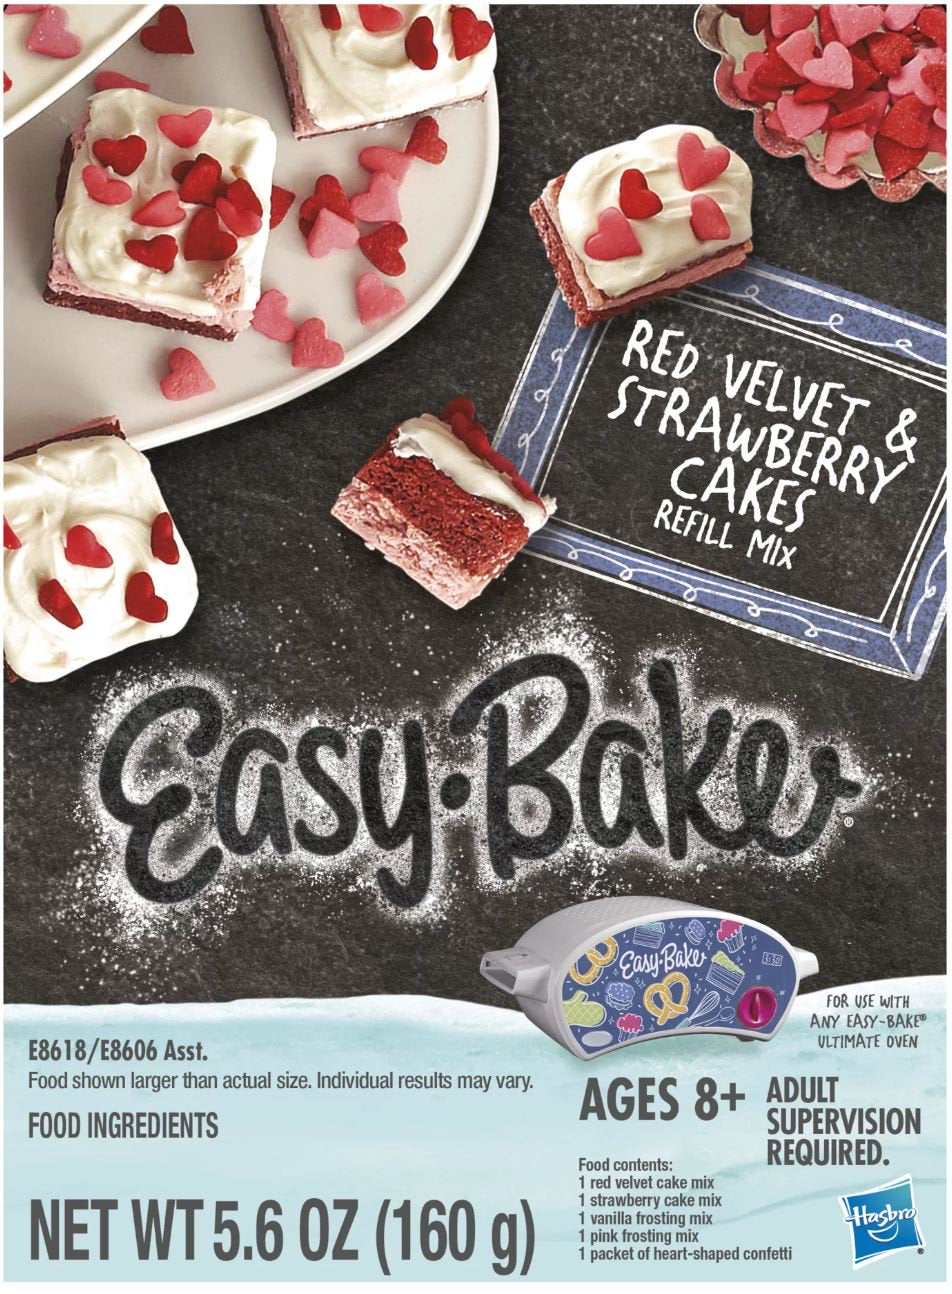 Kids Baking Fun Easy Bake Oven Ultimate Star Edition + Designer Decorating Kit + Red Velvet Cupcakes Refill + Chocolate Chip and Pink Sugar Cookies Refill